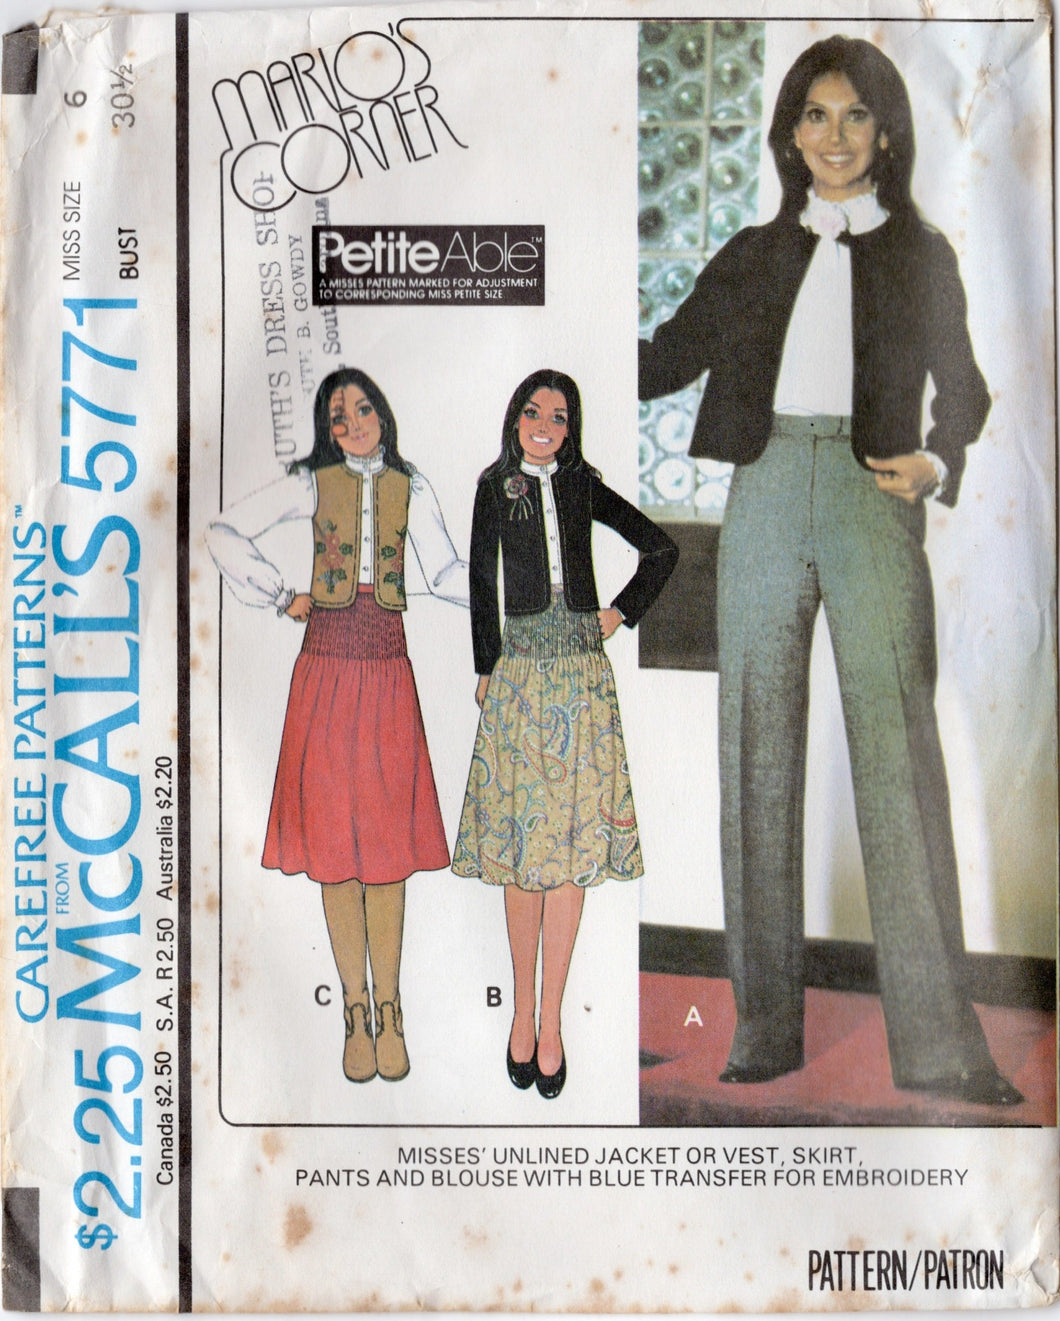 1970's McCall's Marlo's Corner Unlined Jacket or Vest, Tucked Skirt, Pants and Blouse pattern includes Embroidery - Bust 30.5-38